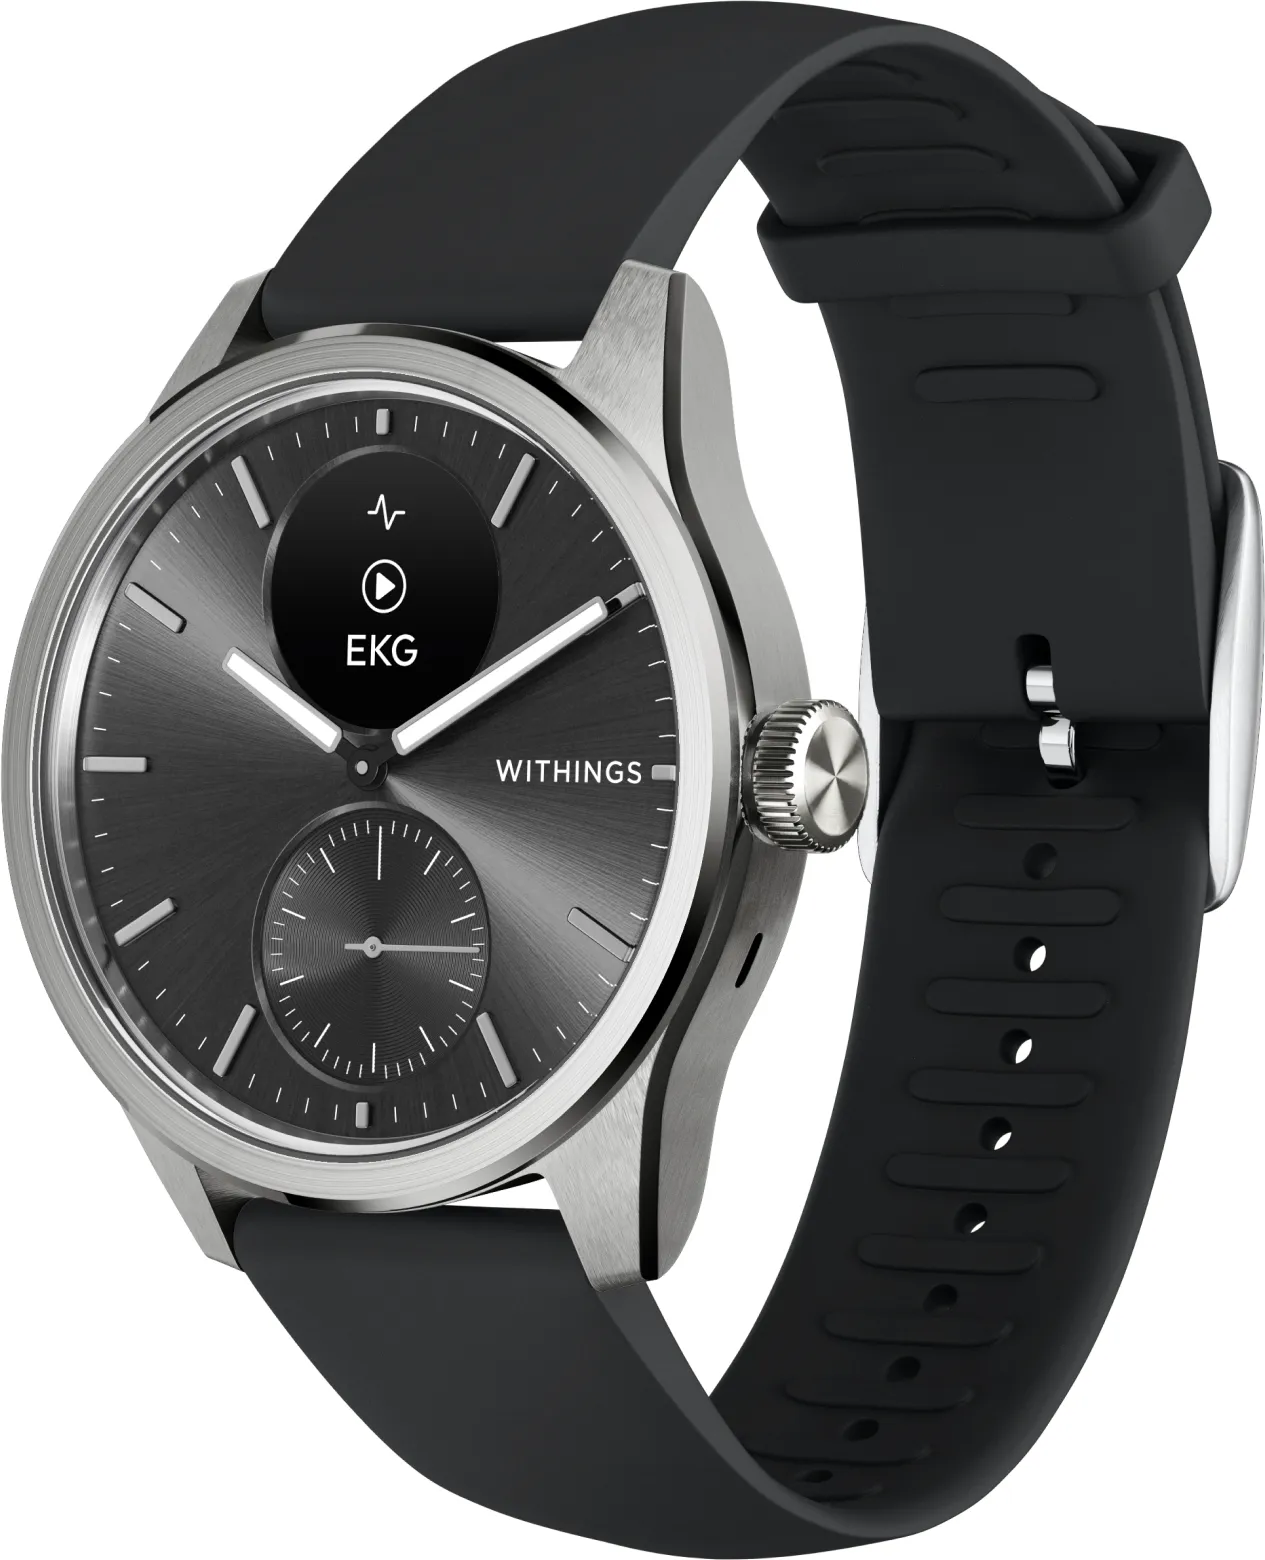 Withings Scanwatch 2 - Black 42mm